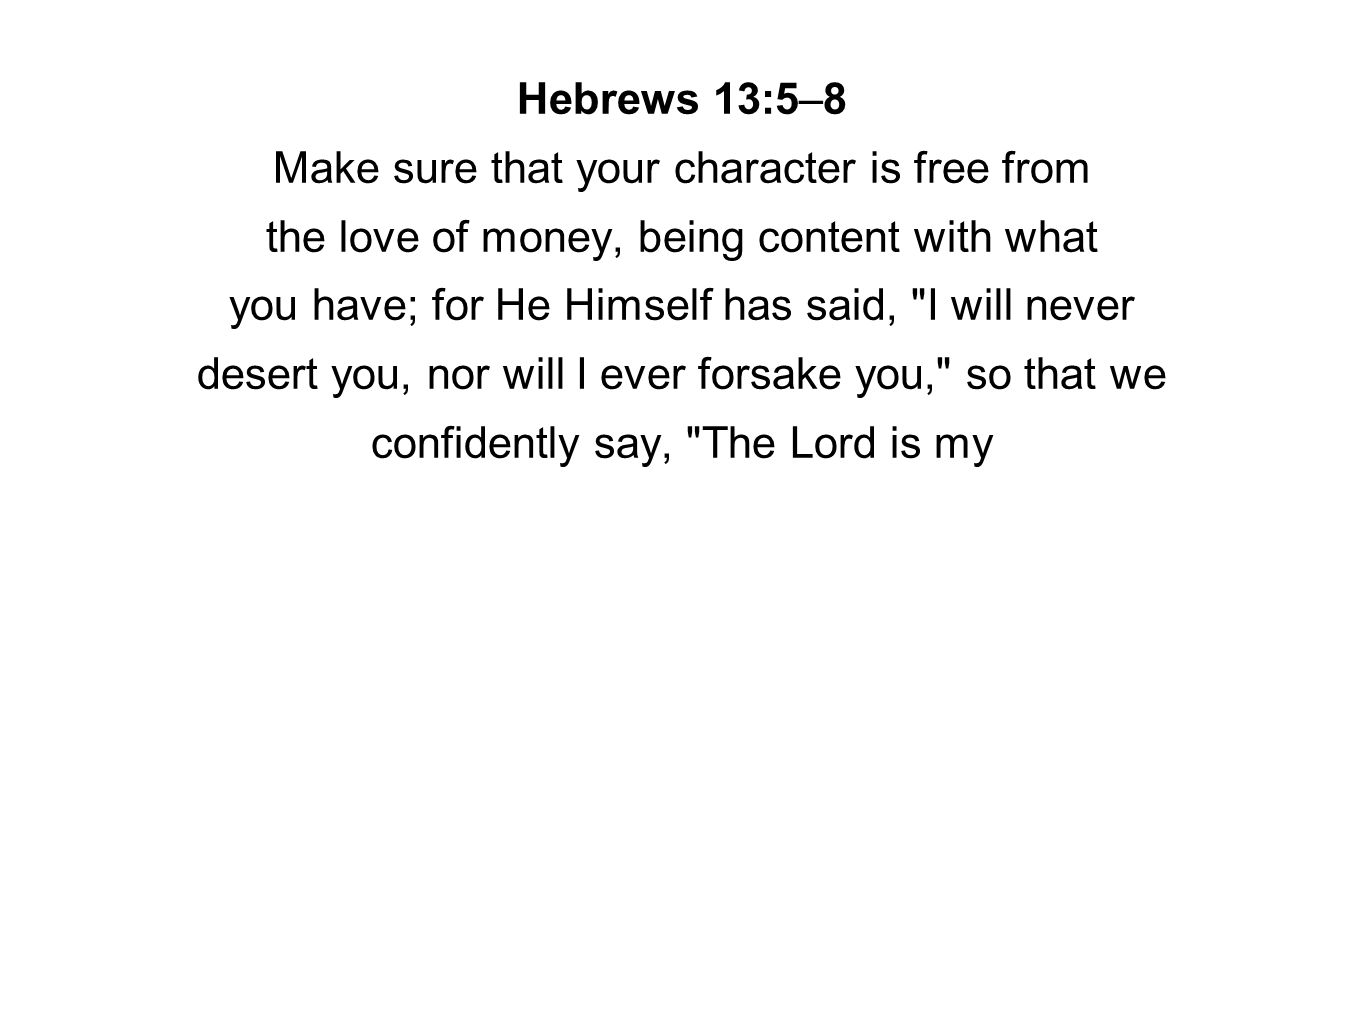 Hebrews 13:5–8 Make sure that your character is free from the love of money, being content with what you have; for He Himself has said, I will never desert you, nor will I ever forsake you, so that we confidently say, The Lord is my